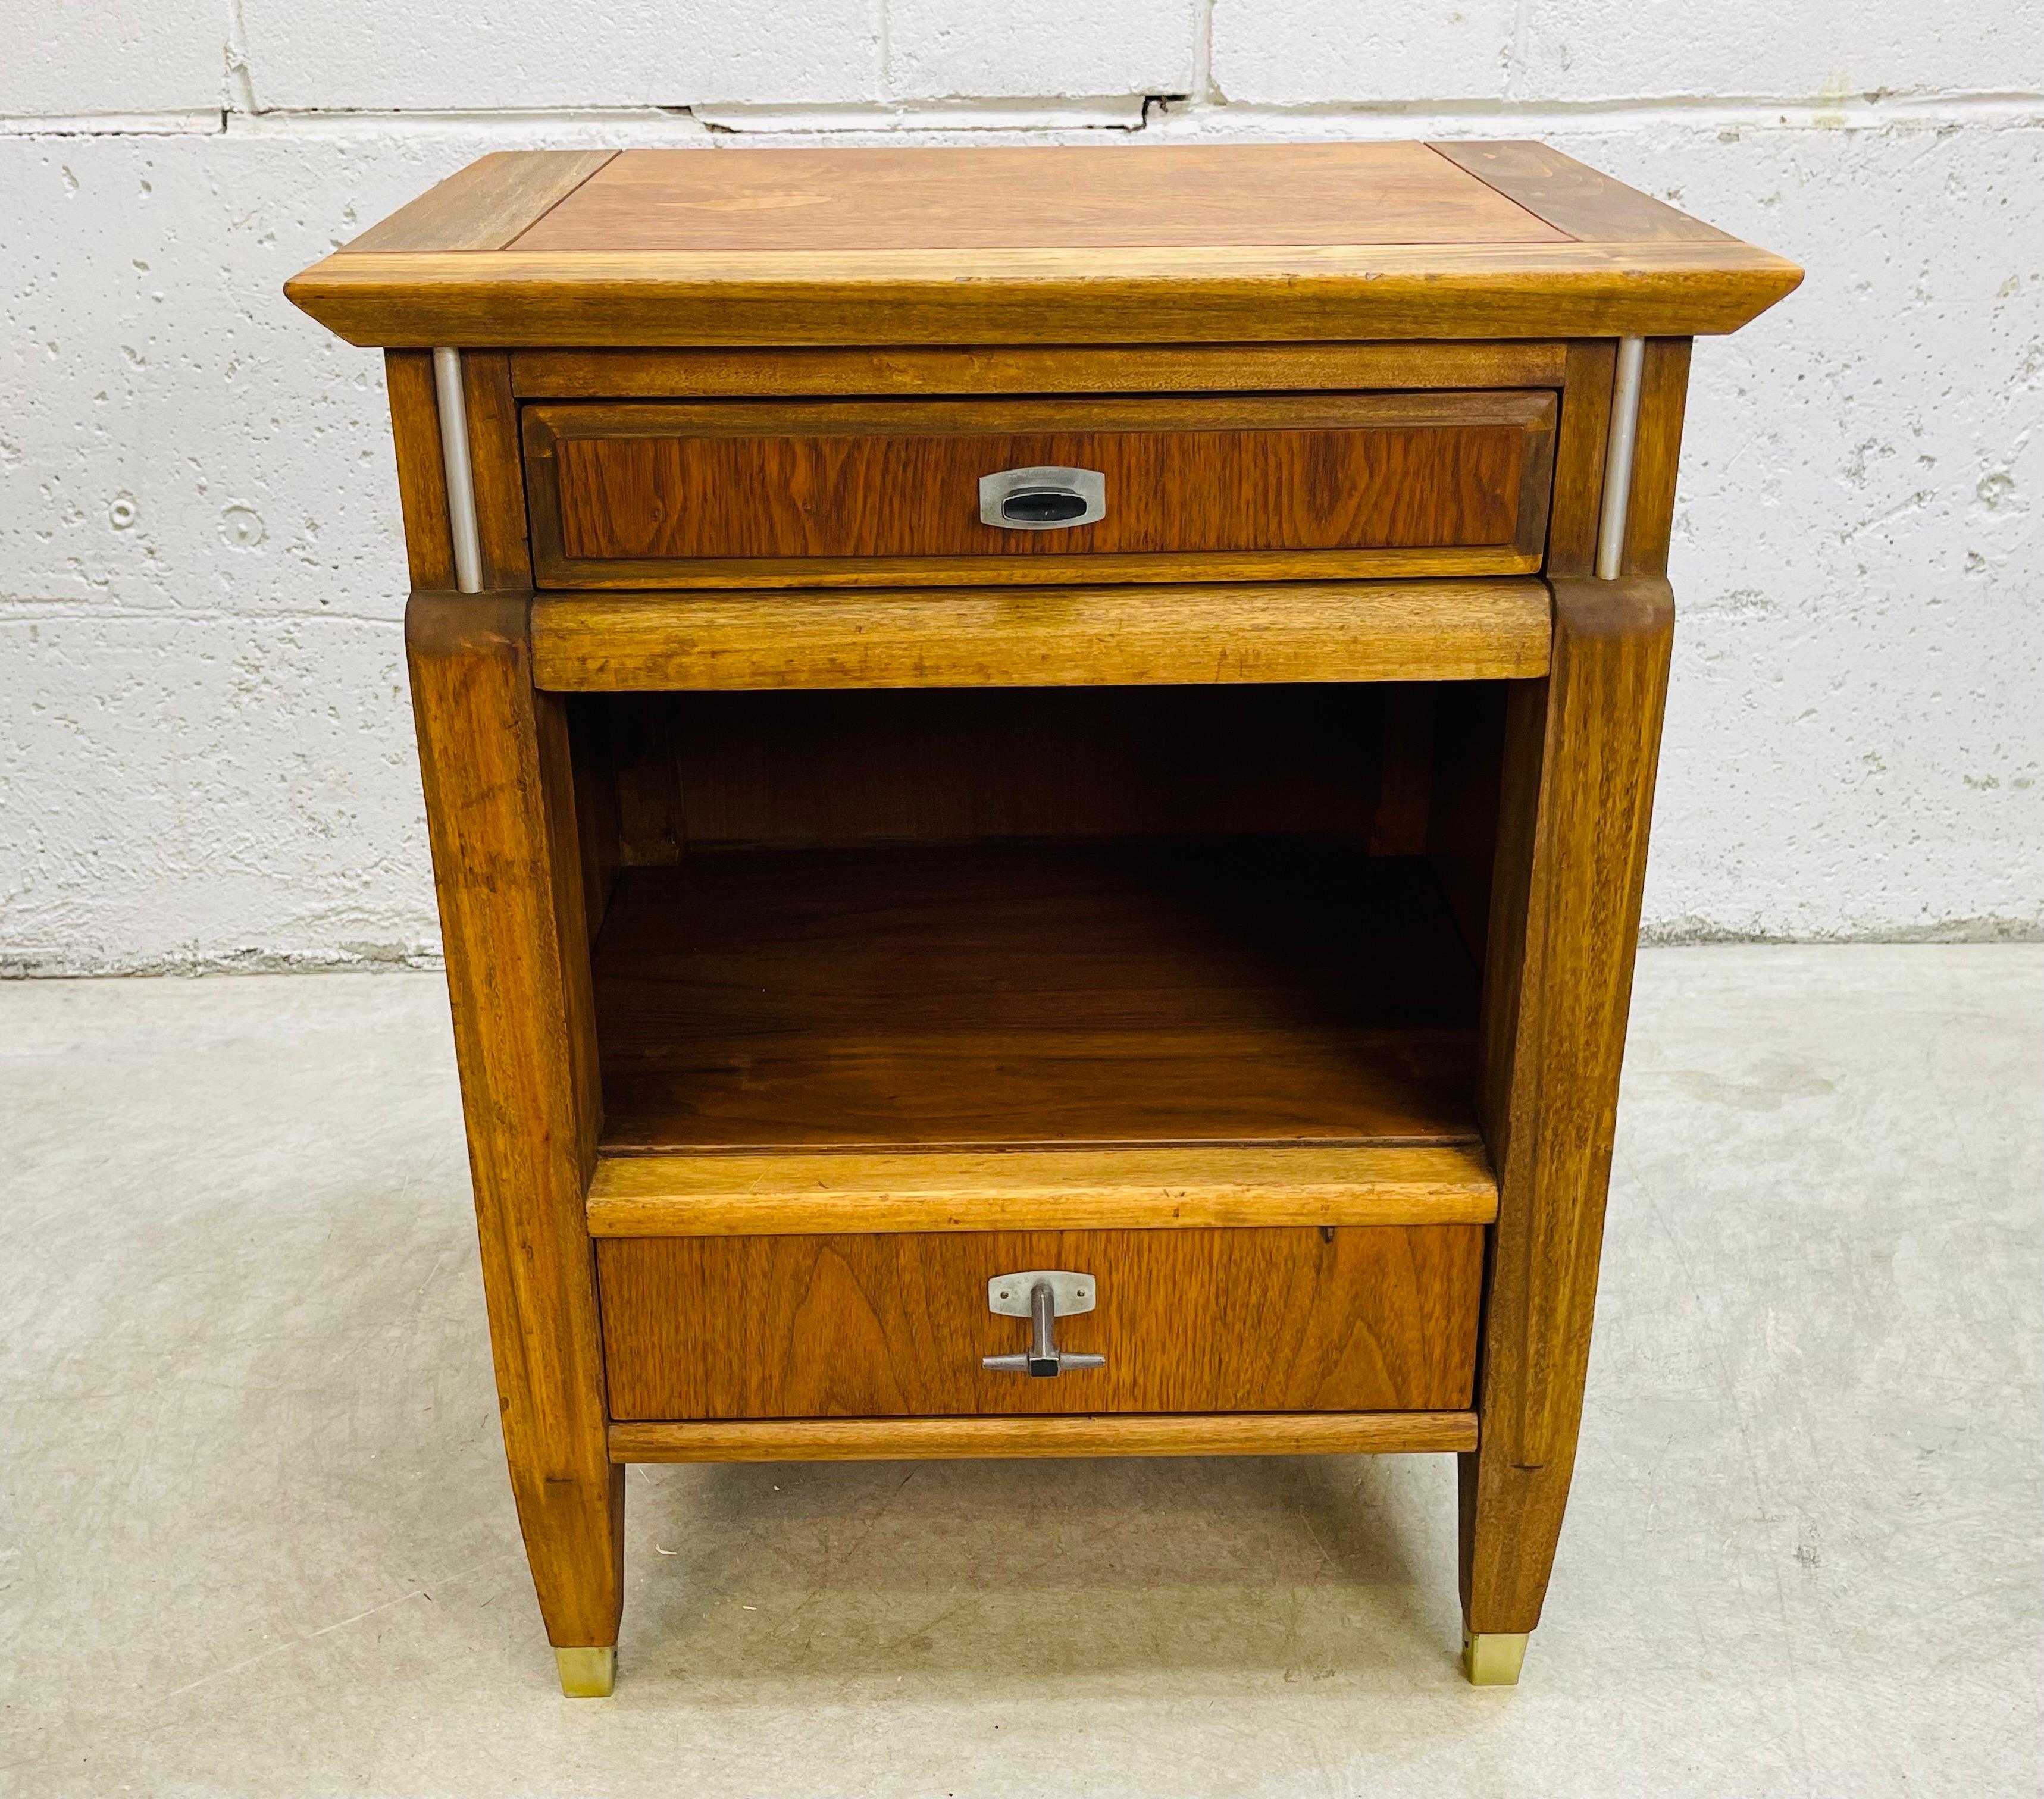 Vintage 1960s walnut and elm wood nightstand. The nightstand has a two drawers for storage and open storage in the middle. The drawer pulls are metal with and industrial design. Marked in the drawer.